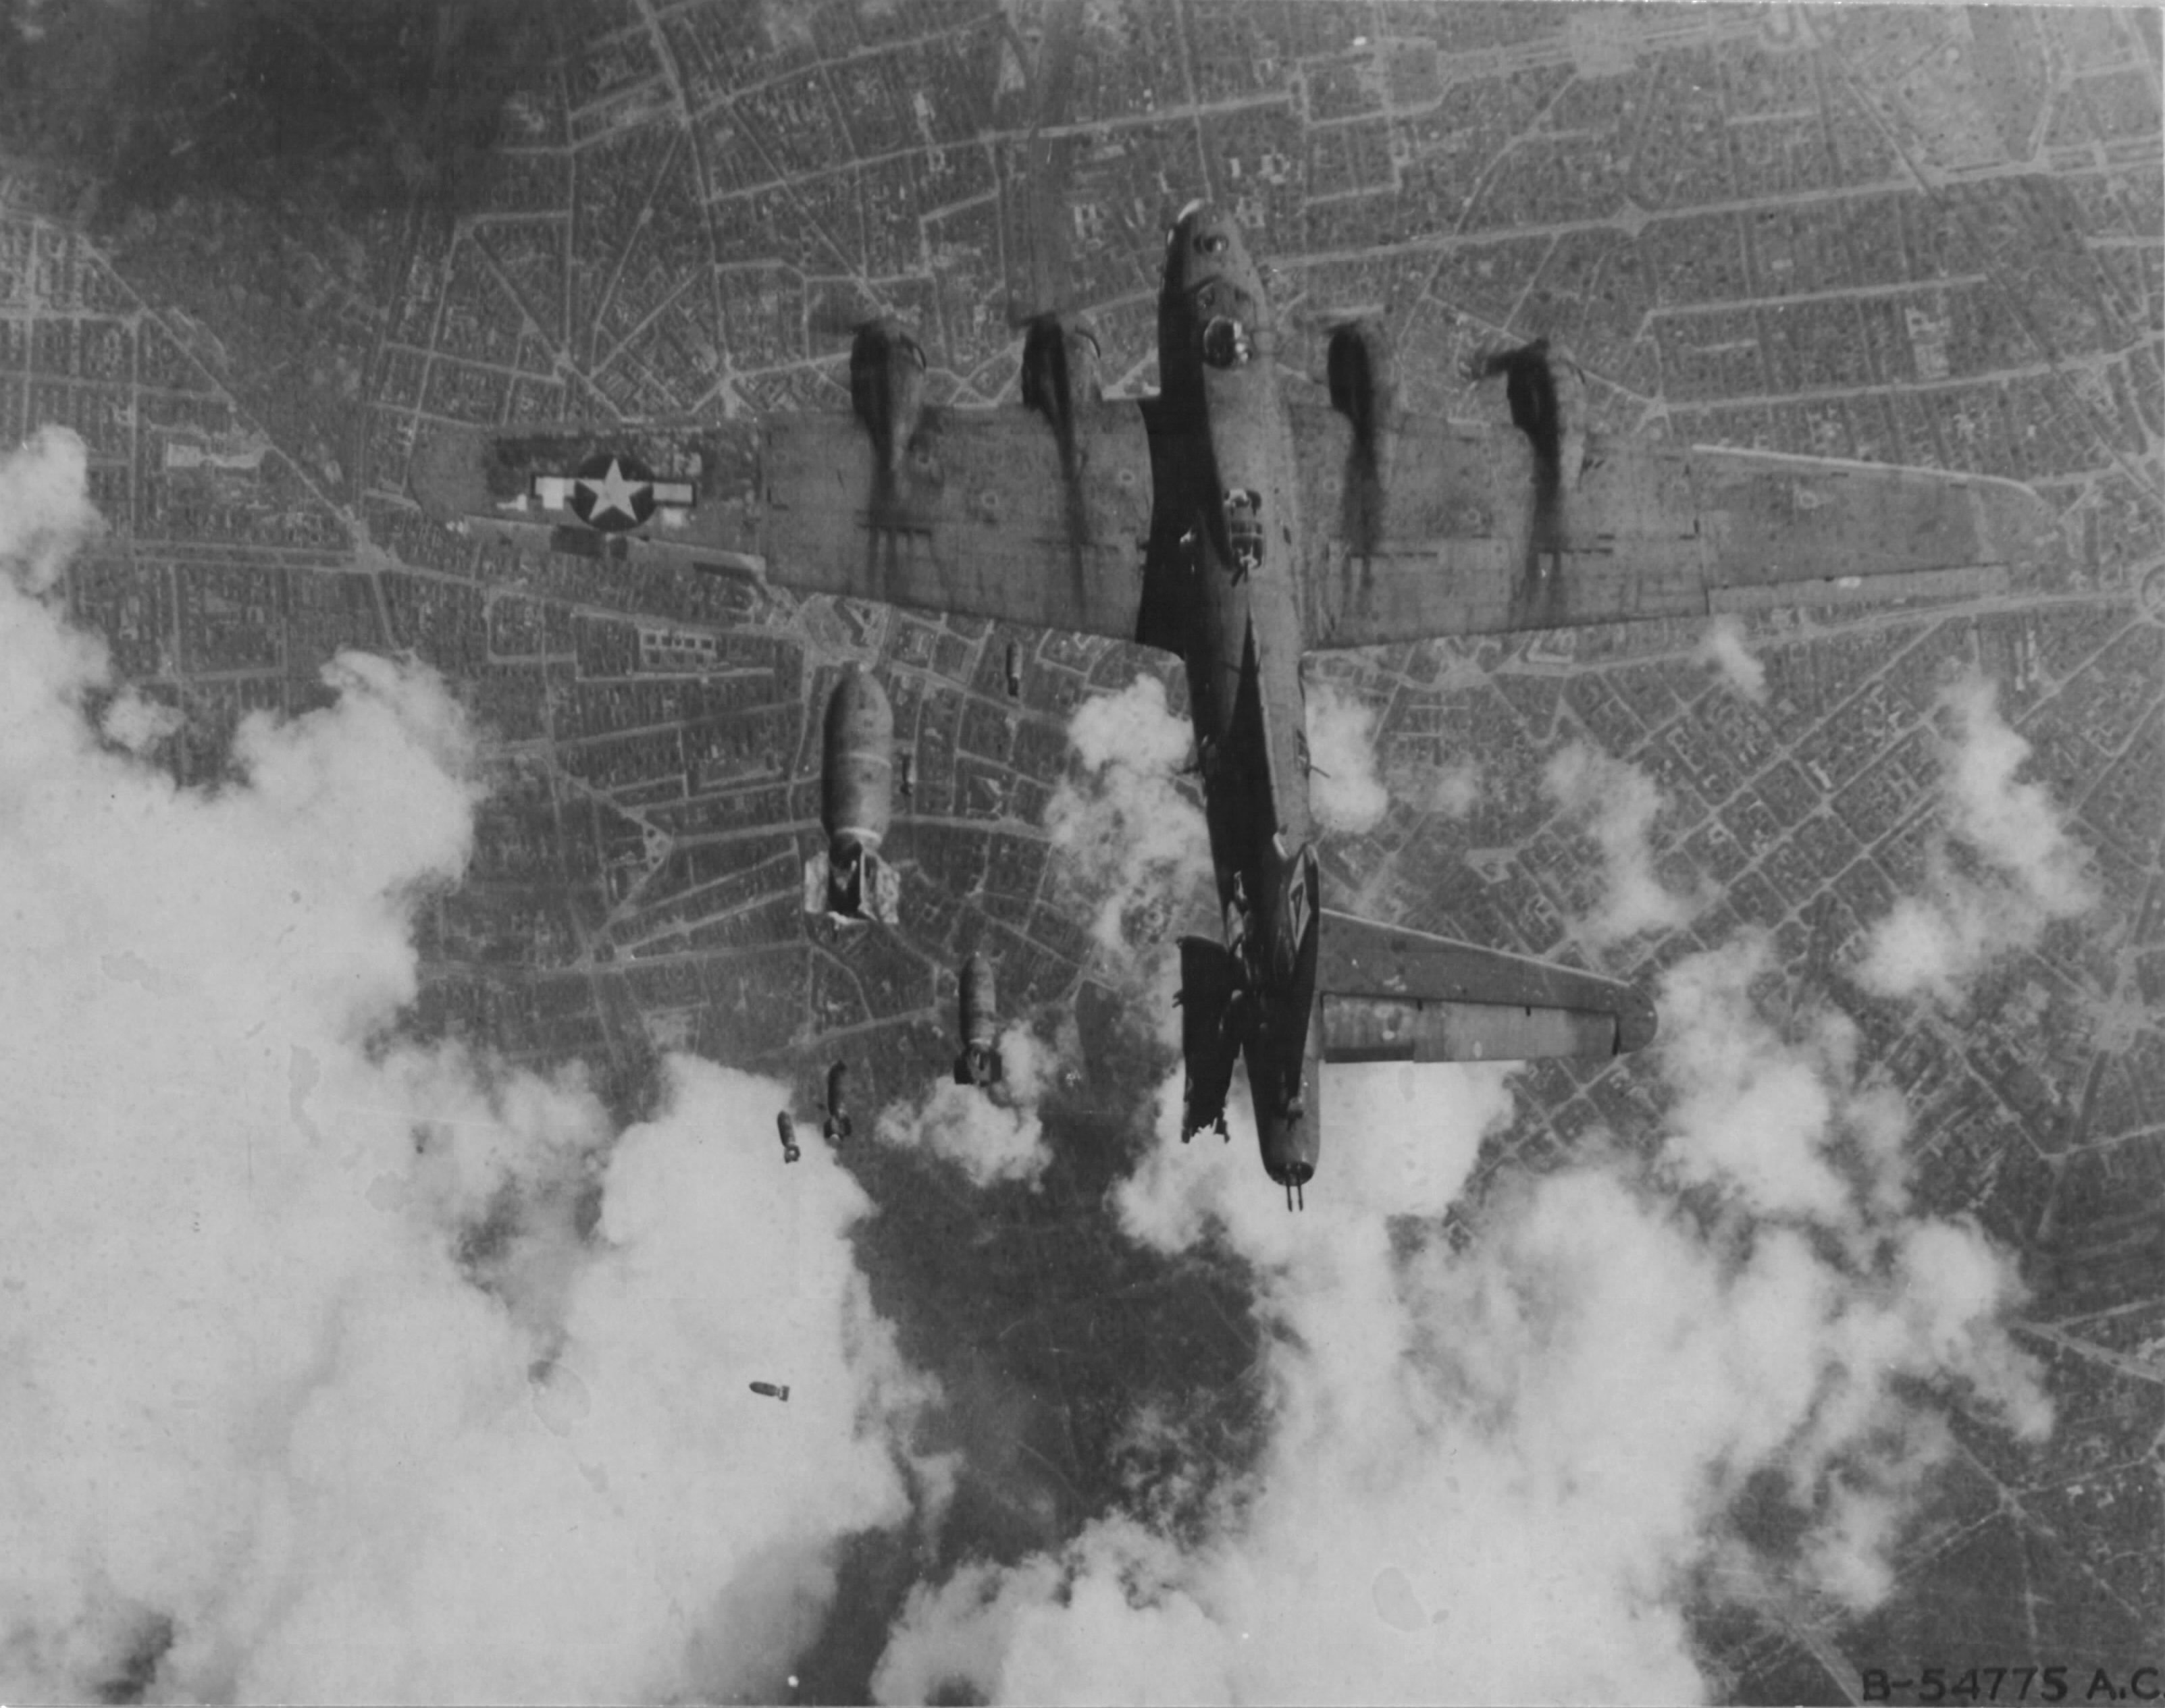 B-17G Fortress 'Miss Donna Mae II' drifted under another bomber on a bomb run over Berlin, 19 May 1944. A 1,000 lb bomb from above tore off the left stabilizer and sent the plane into an uncontrollable spin. All 11 were killed. Photo 3 of 4